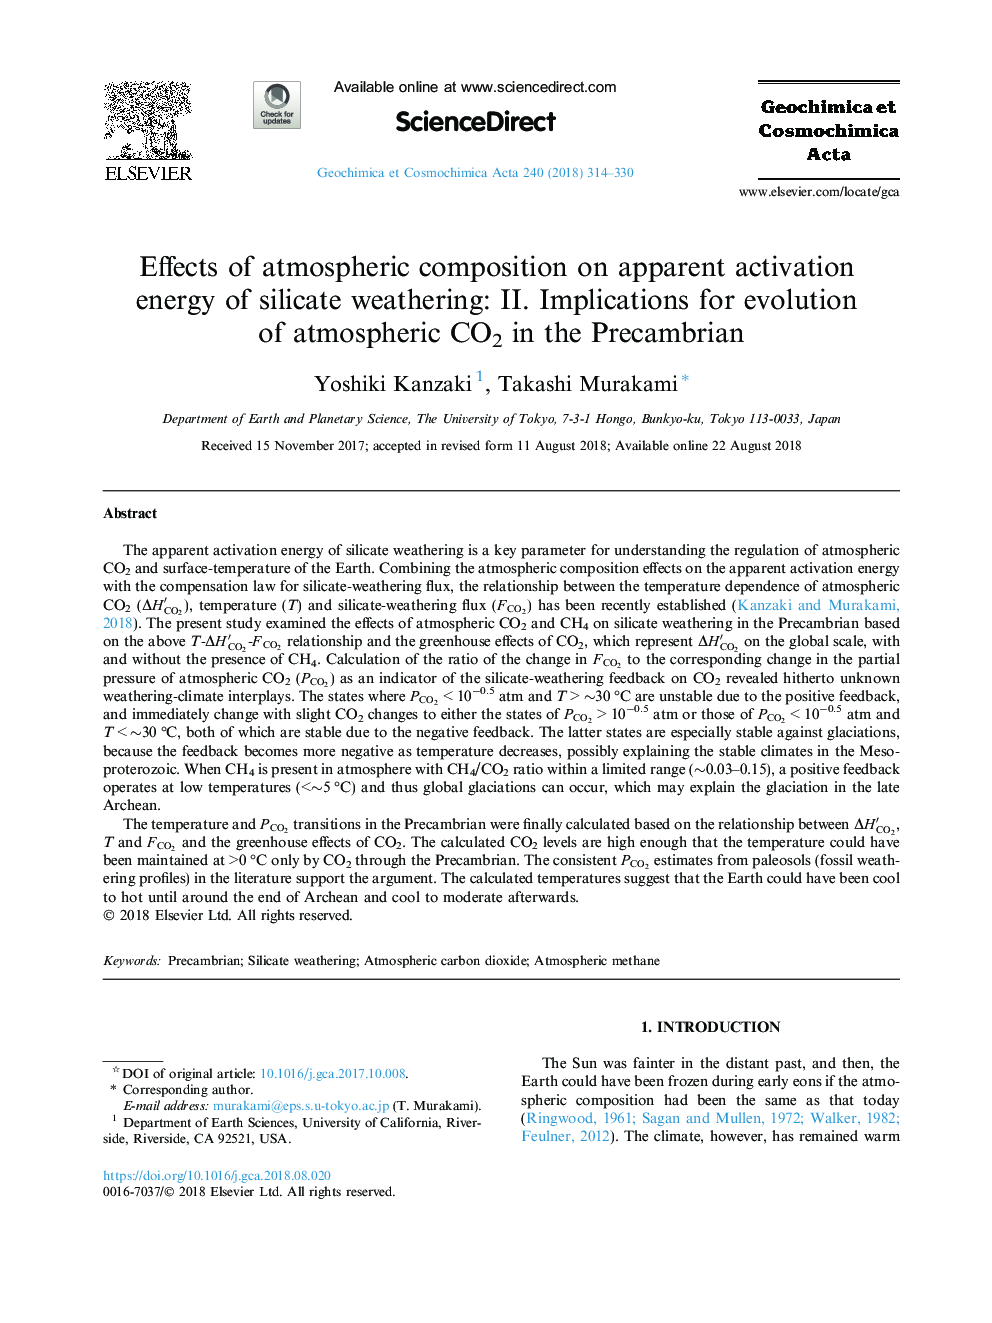 Effects of atmospheric composition on apparent activation energy of silicate weathering: II. Implications for evolution of atmospheric CO2 in the Precambrian